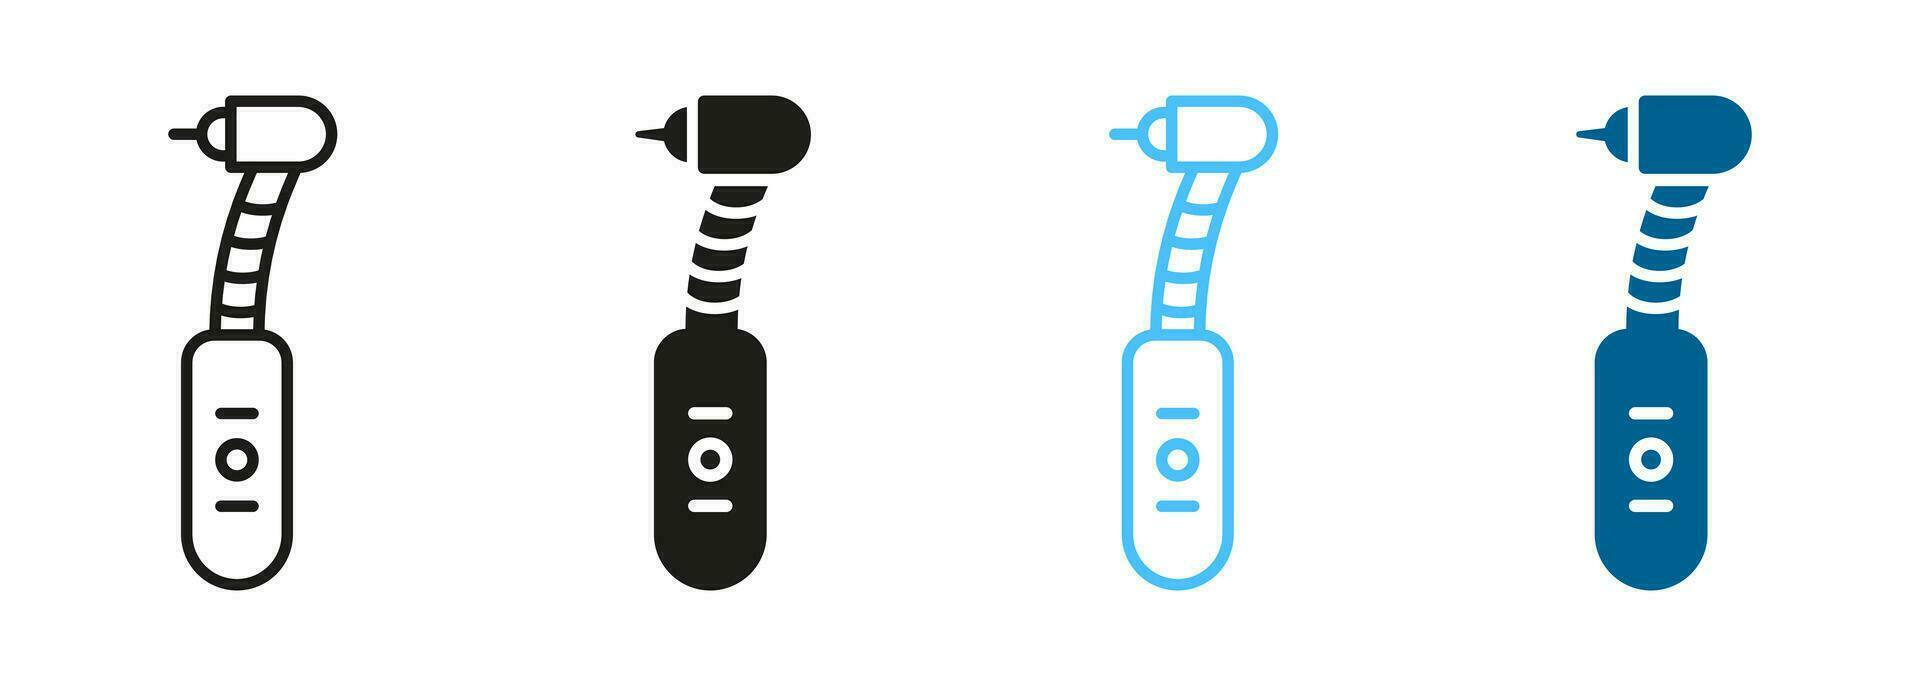 Dental Drill Line and Silhouette Icon Set. Dentists Professional Instrument Black and Color Pictogram Collection. Tooth Care Equipment Symbol. Medical Drilling Tool Sign. Isolated Vector Illustration.